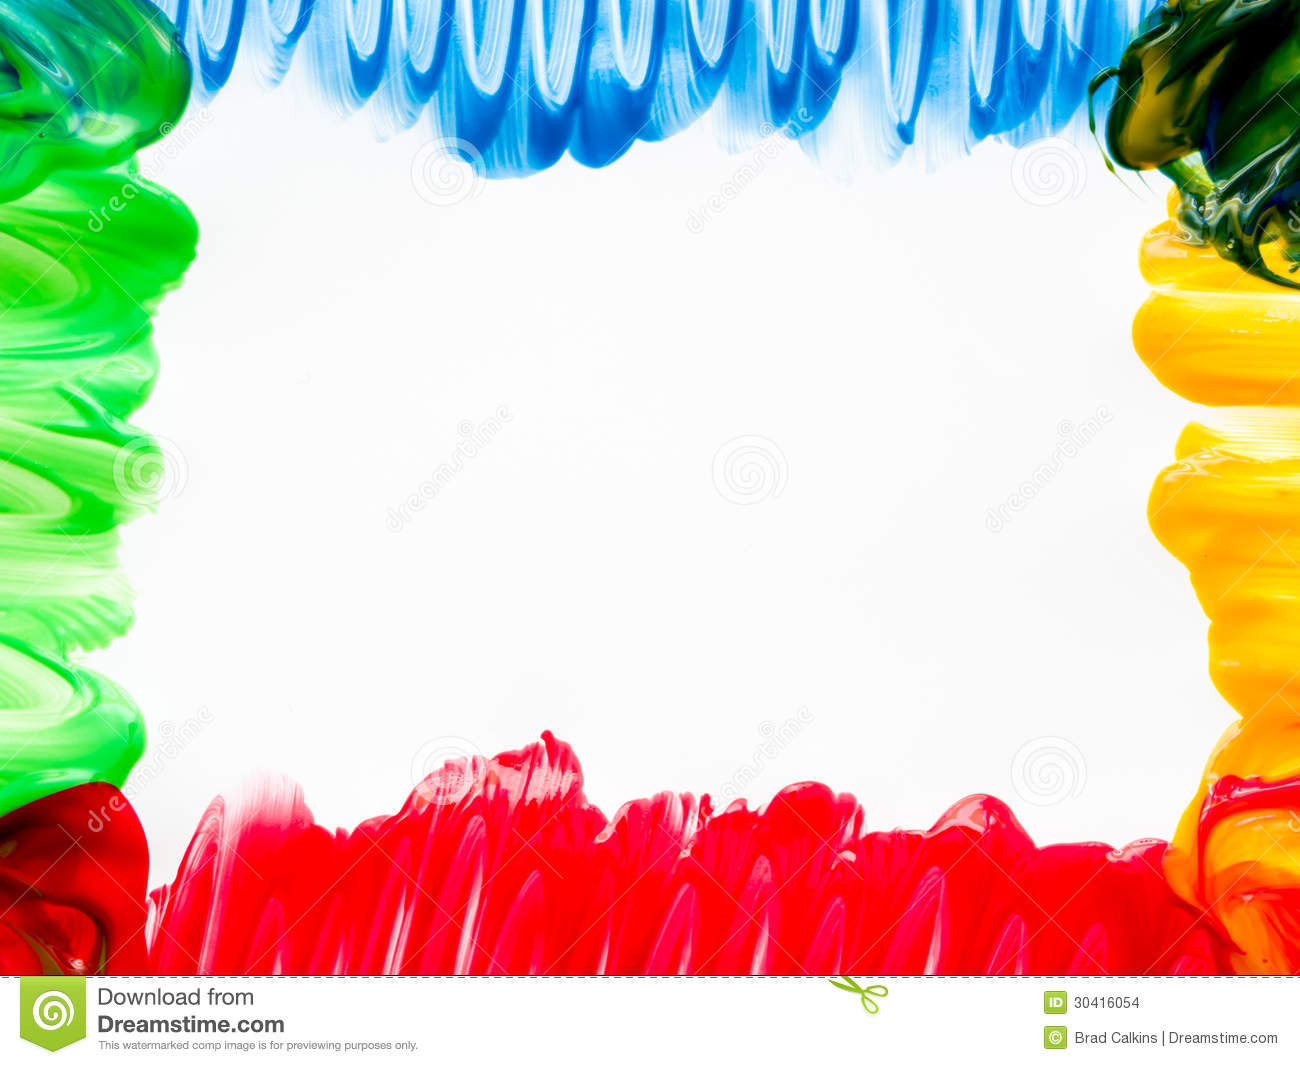 Finger Painting Frame Stock Images   Image  30416054